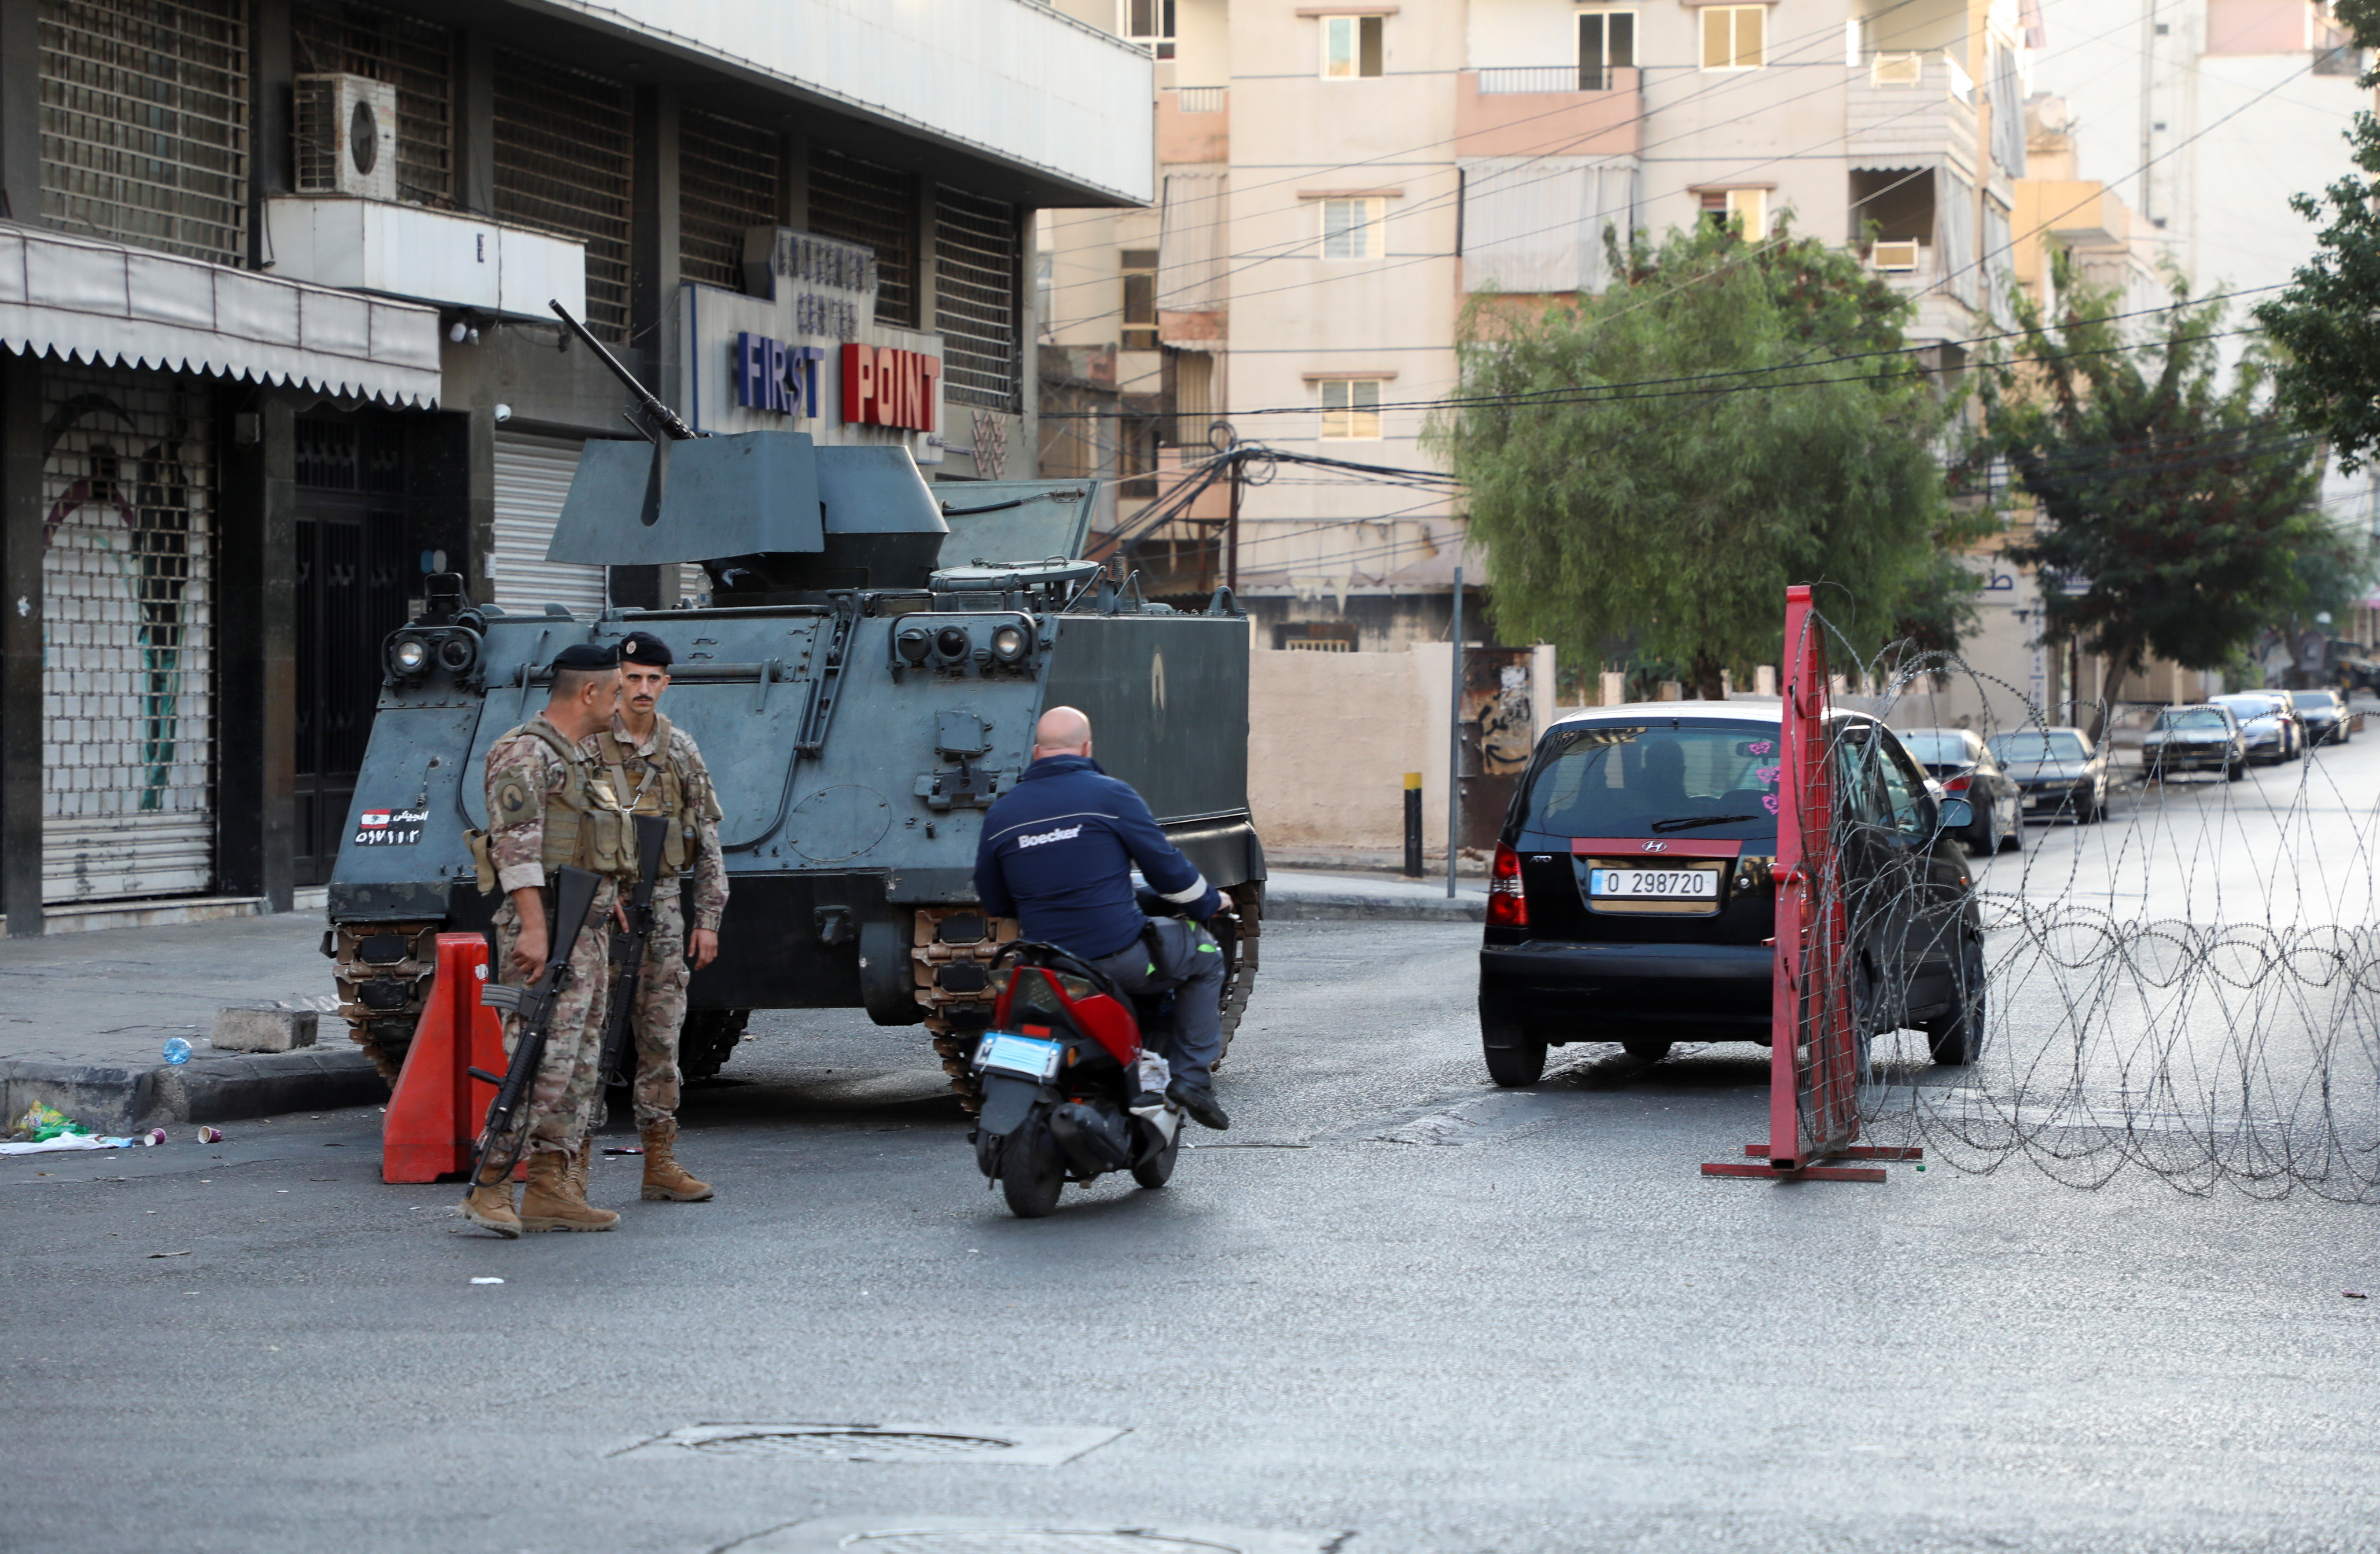 Army soldiers stand guard at a checkpoint a day after gunfire erupted in an attack on protesters who were heading for a demonstration called by Hezbollah to demand the removal of the judge investigating last year's port explosion, in Beirut, Lebanon October 15, 2021. REUTERS/Mohamed Azakir